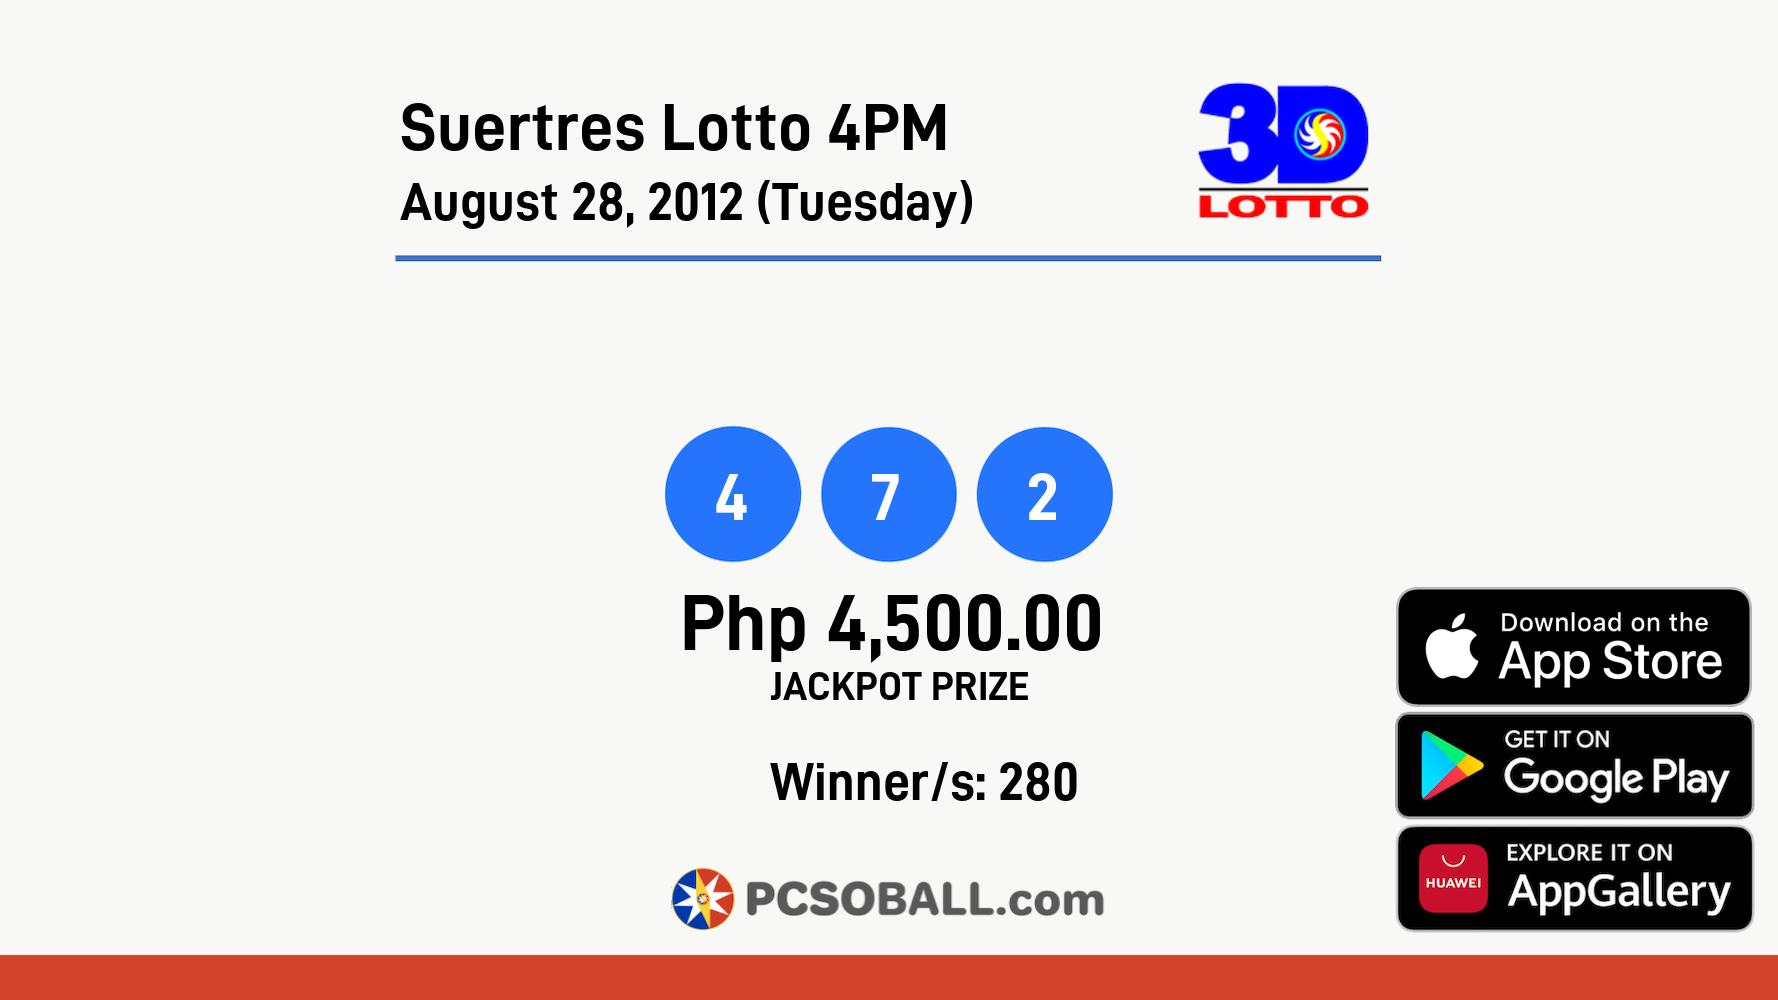 Suertres Lotto 4PM August 28, 2012 (Tuesday) Result